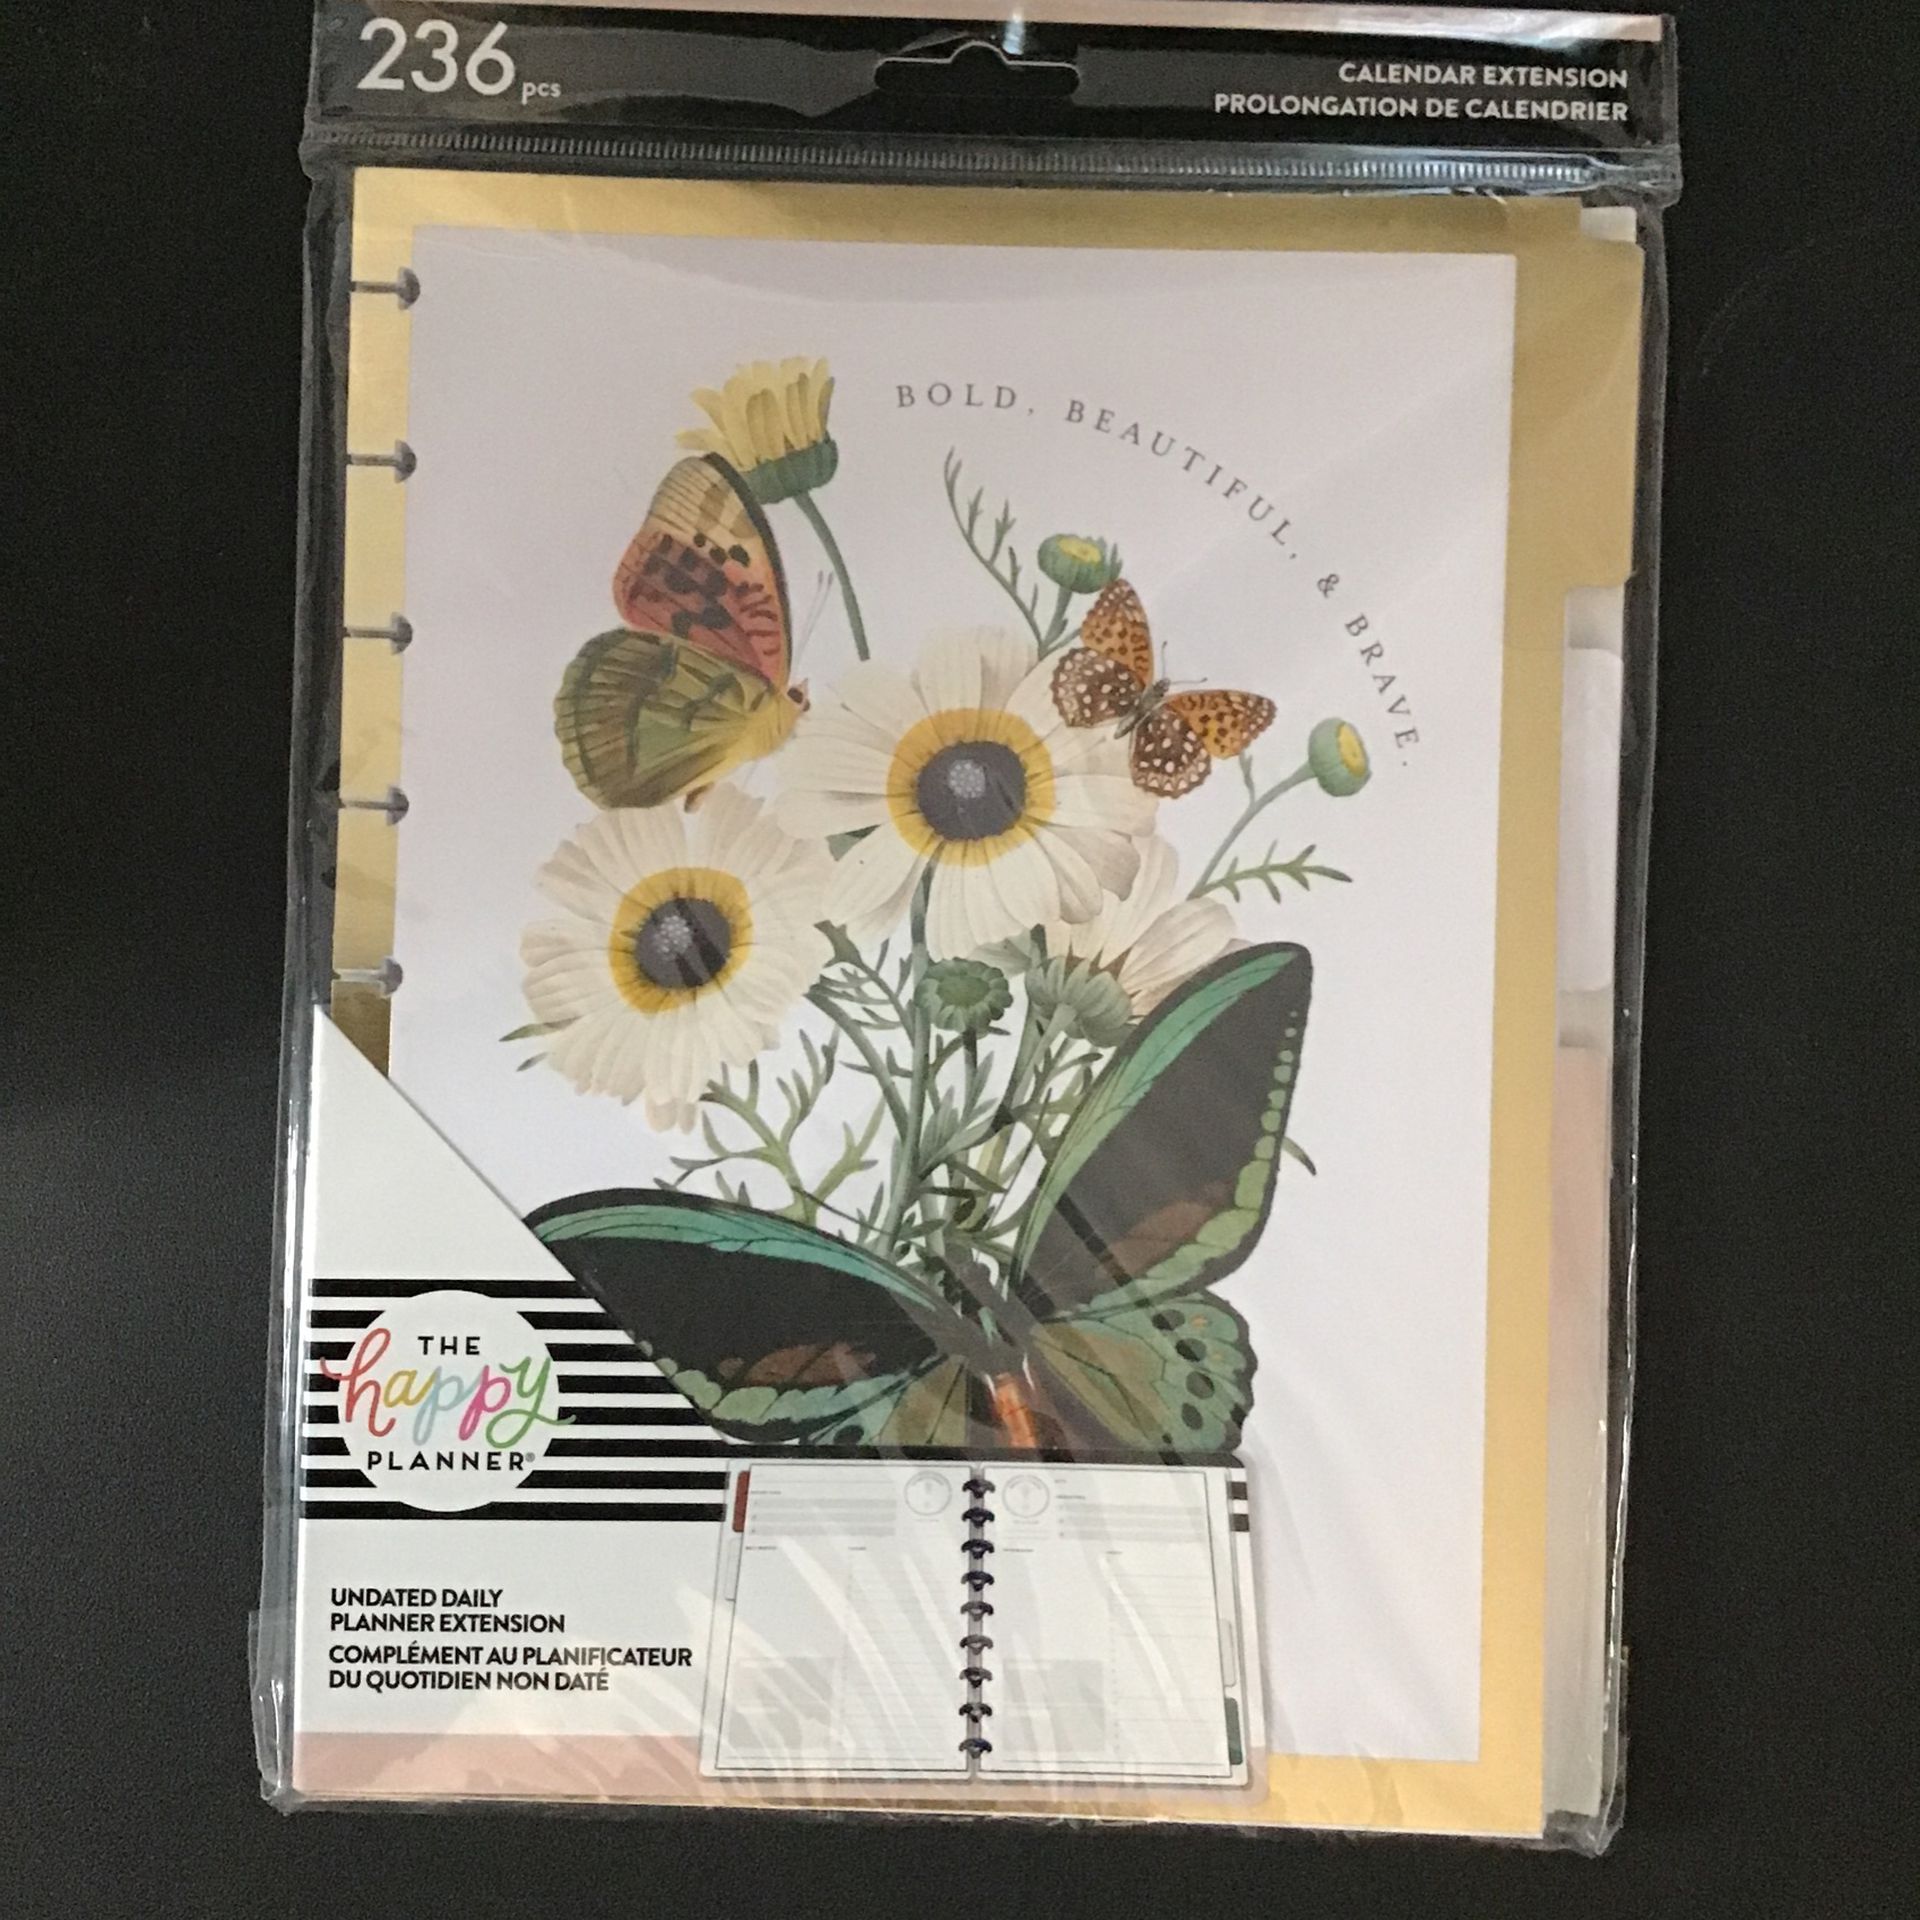 The Happy Planner Papillon Undated Daily Planner Extension $5.00